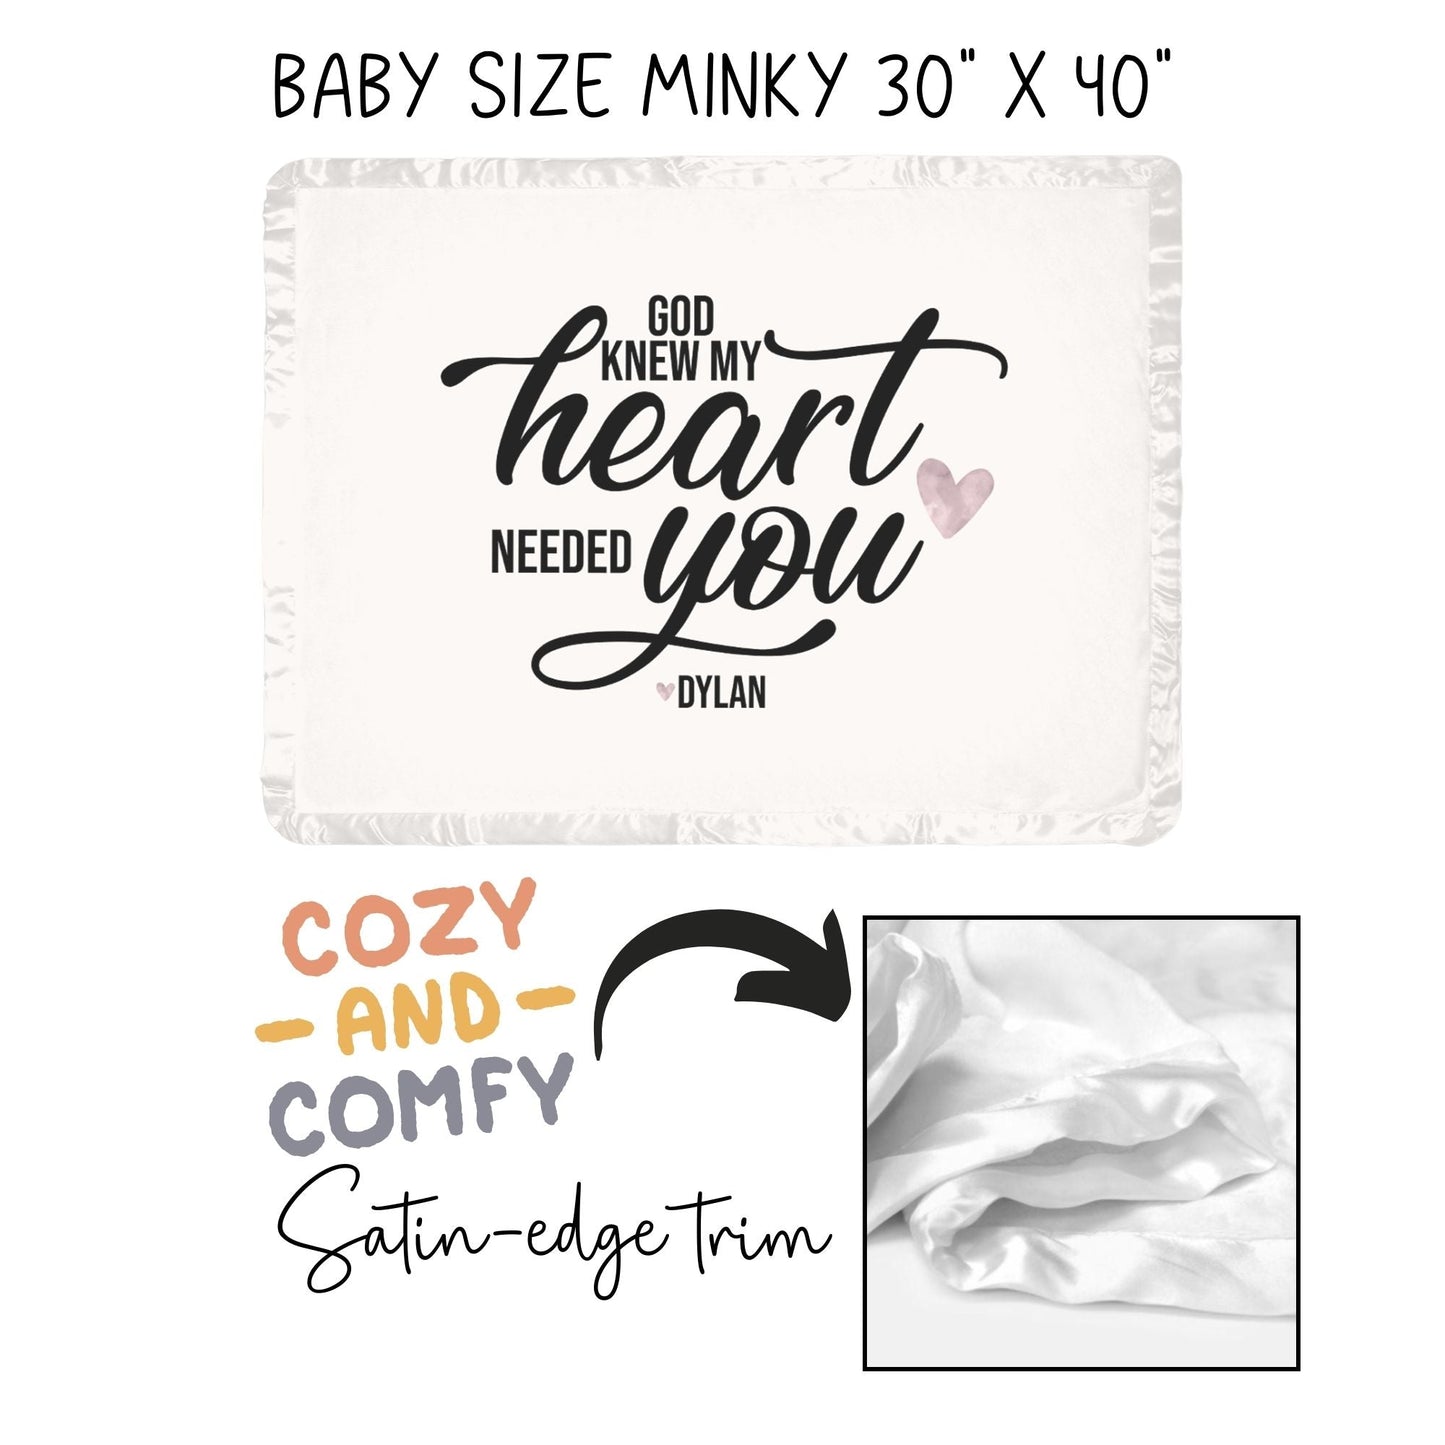 God Knew My Heart Needed You Personalized Blanket - Customizable & Cozy for Baby, Mom or Grandma! - Twinklette